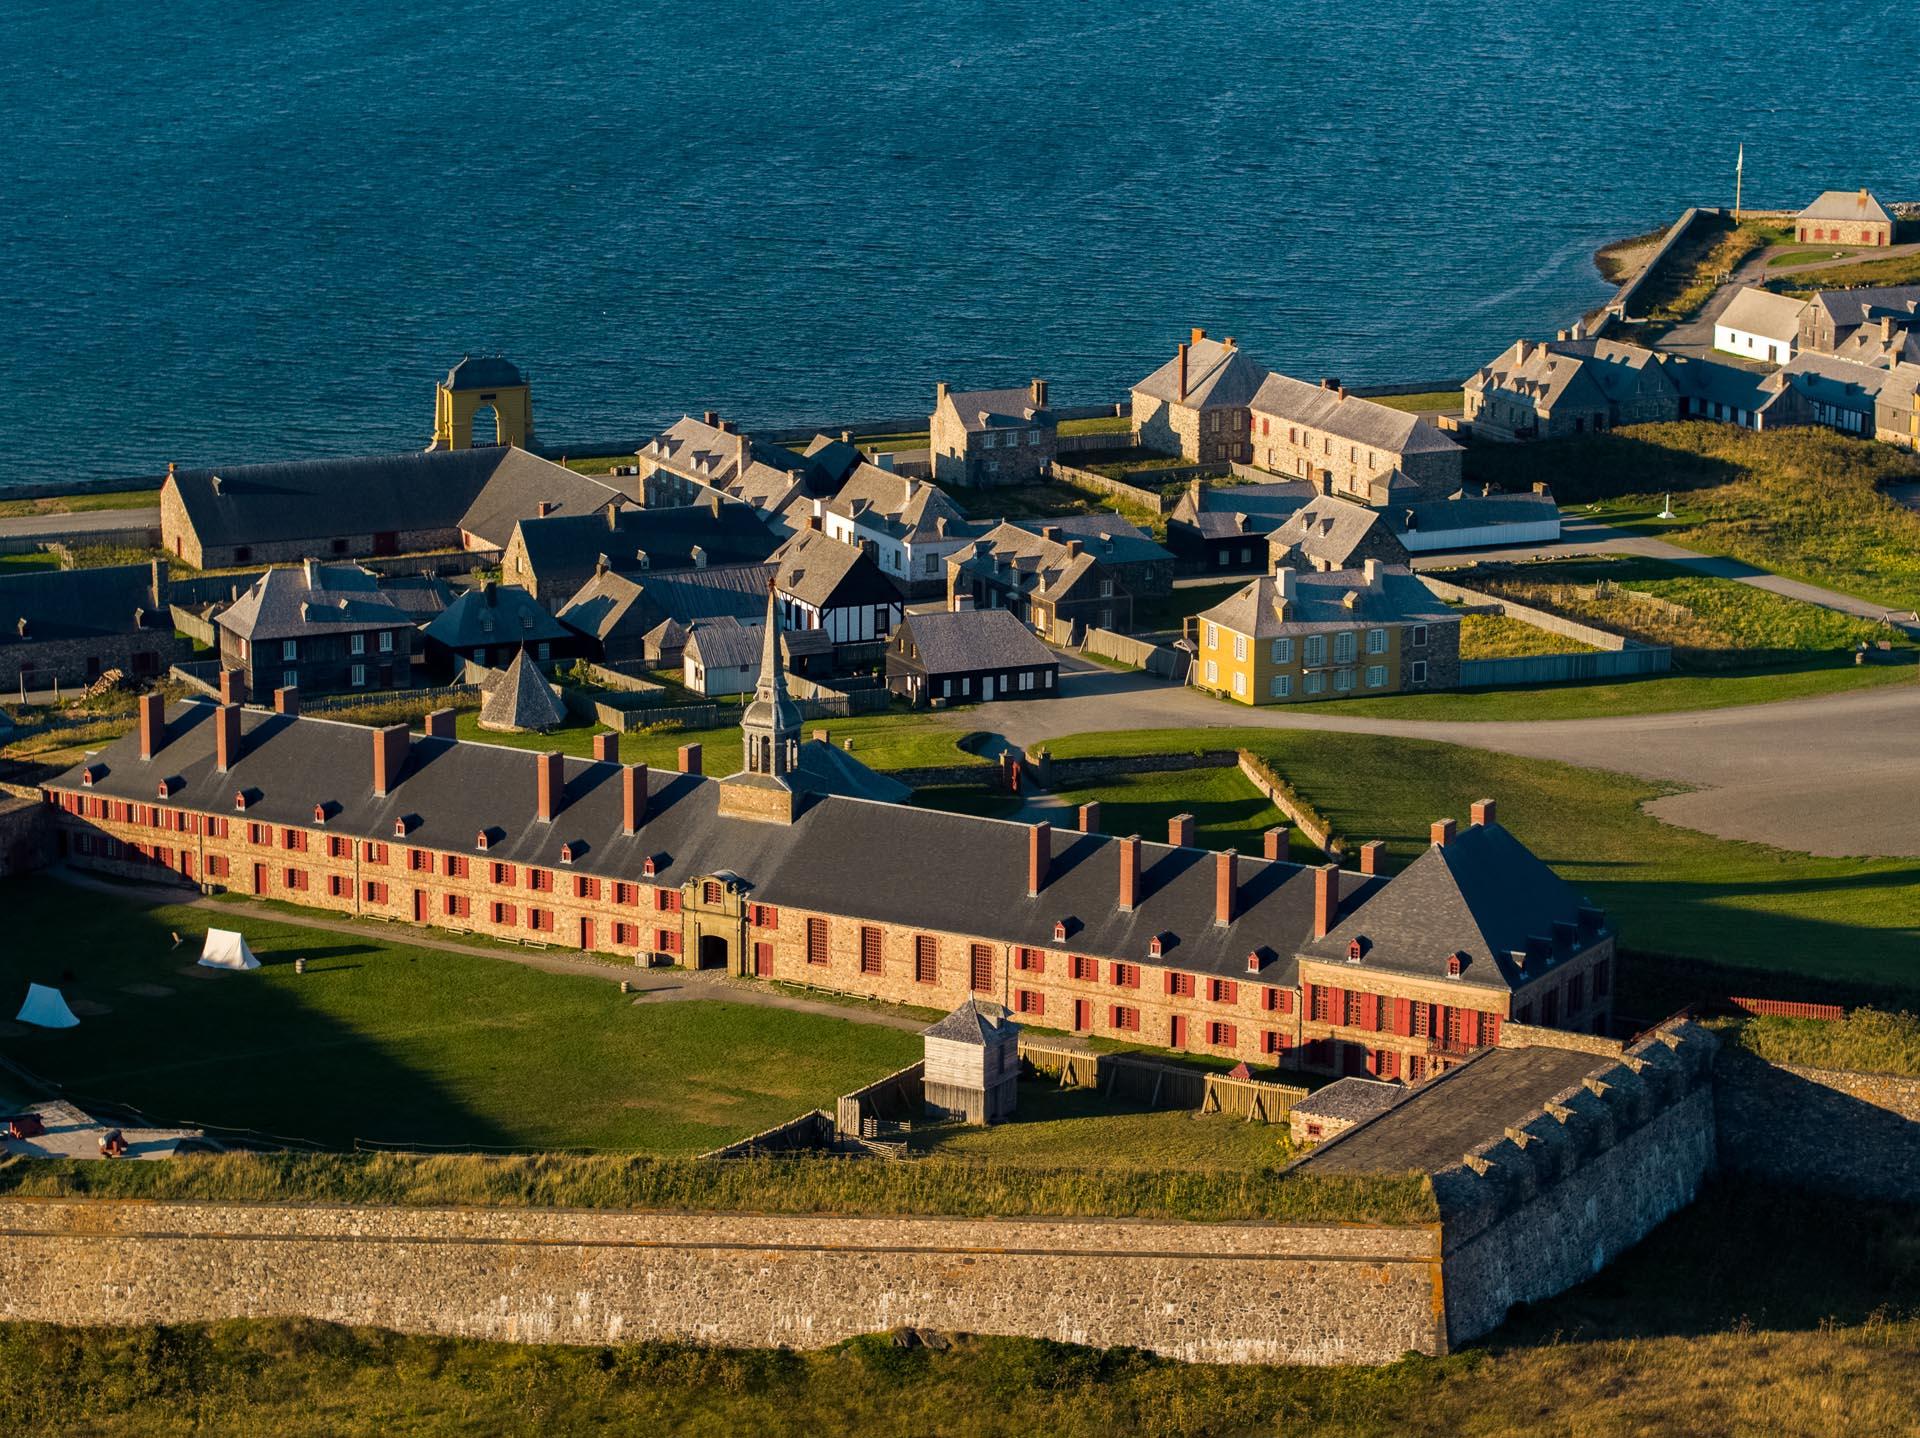 Aerial Viewof Fortressof Louisbourg